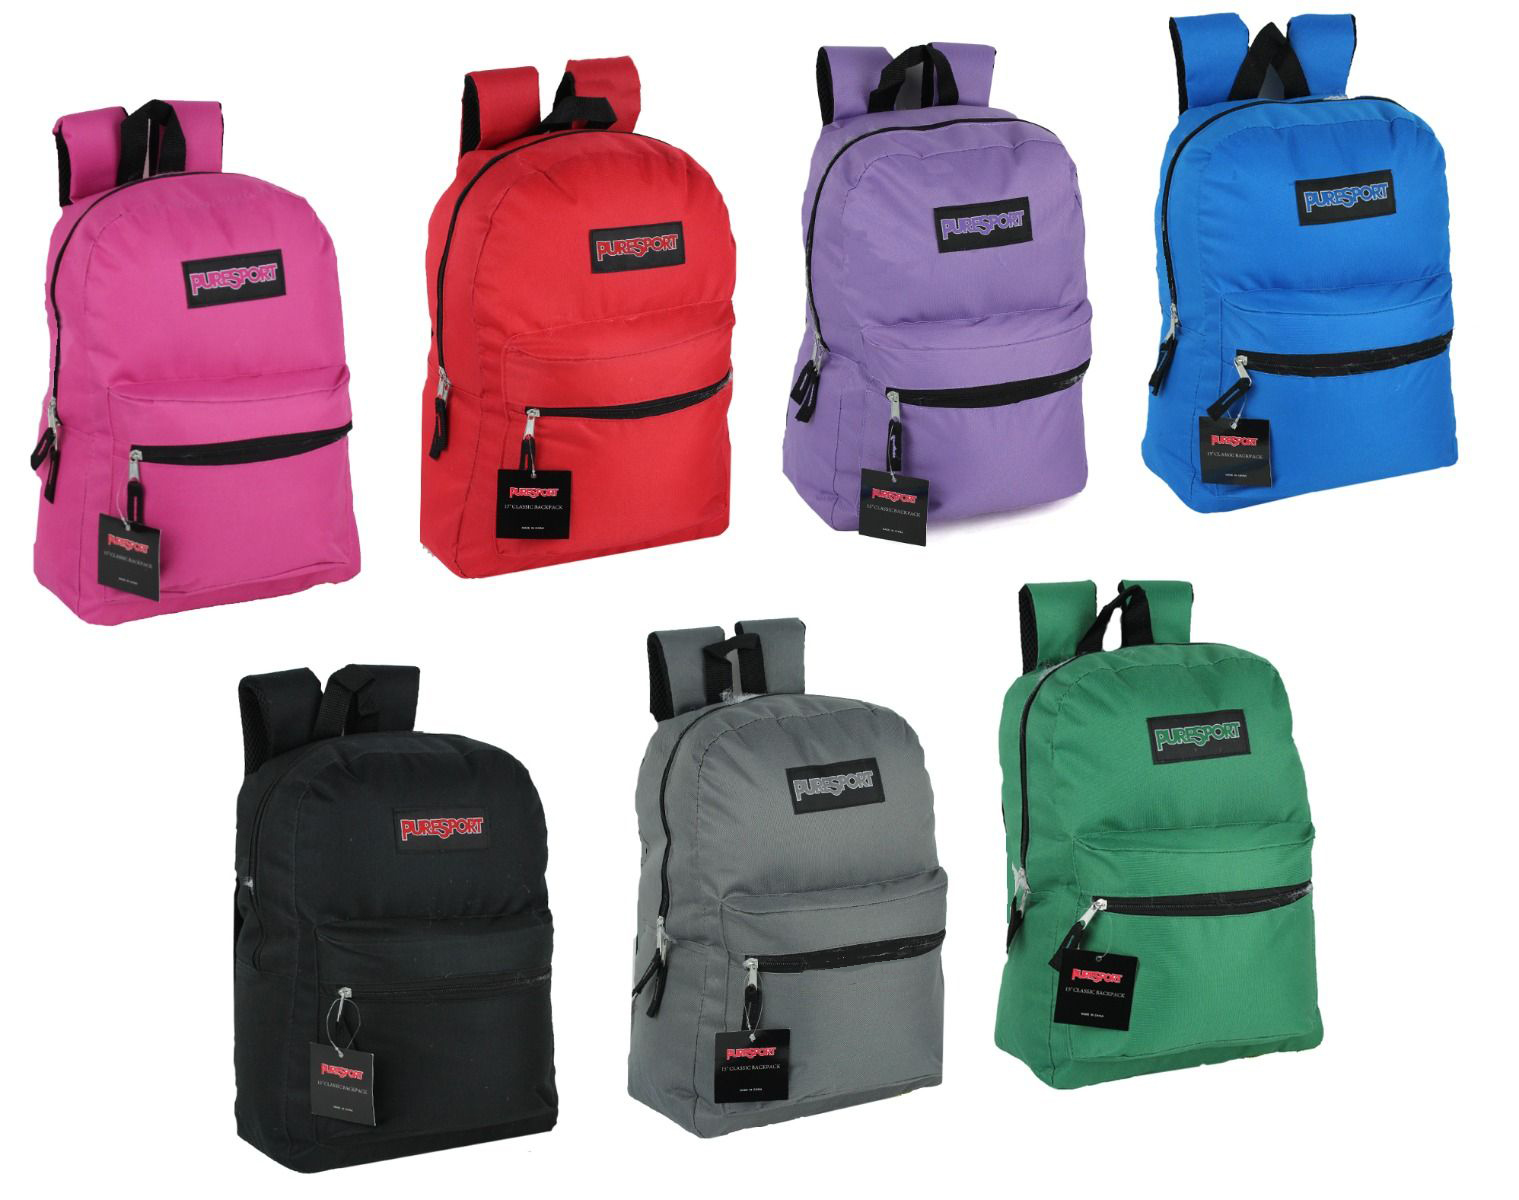 ''17'''' Classic PureSport BACKPACKs - Choose Your Color(s)''